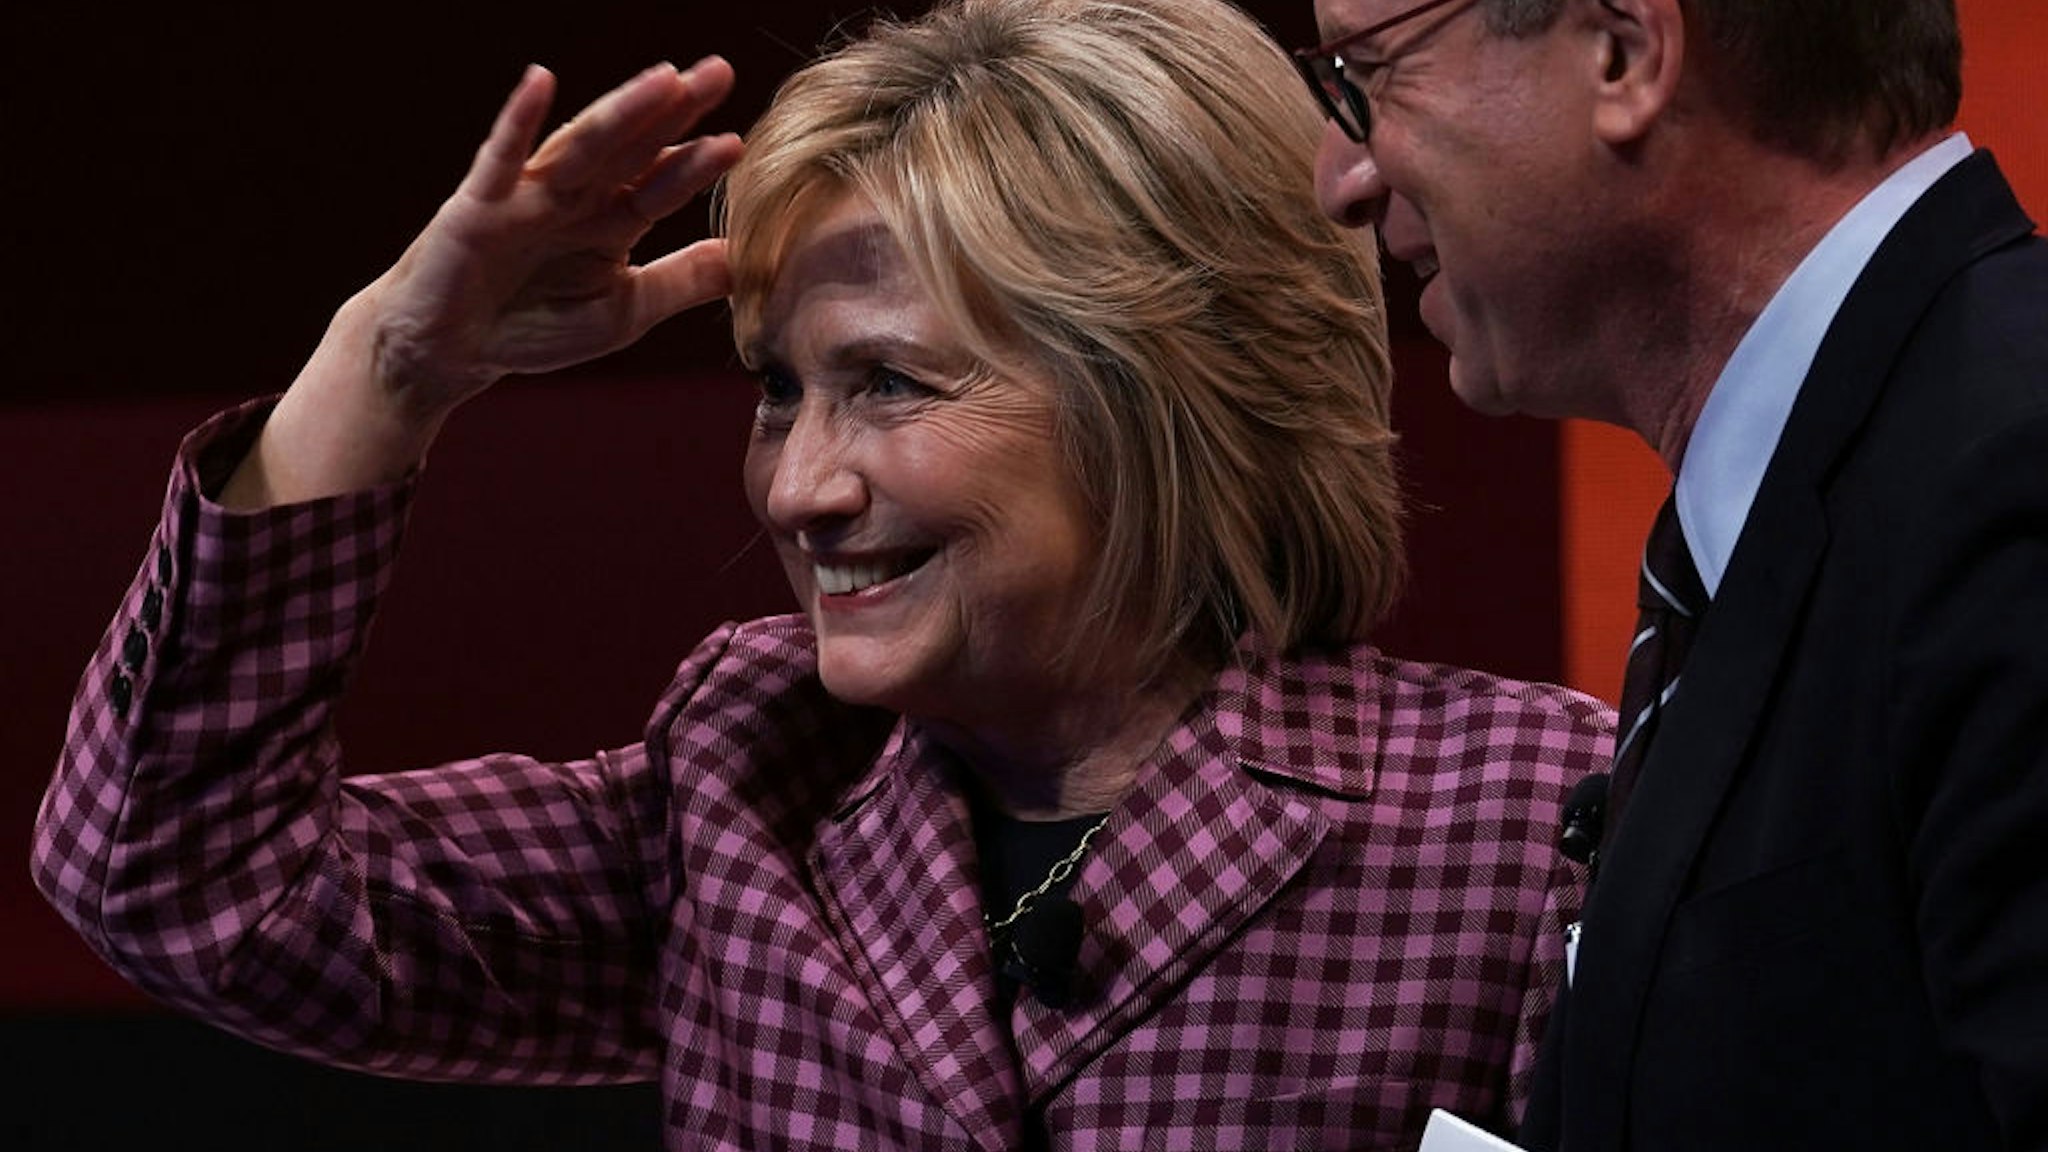 Former U.S. Secretary of State Hillary Clinton waves to audiences as Atlantic editor in chief Jeffrey Goldberg looks on after a discussion during the 2018 Atlantic Festival October 2, 2018 in Washington, DC.